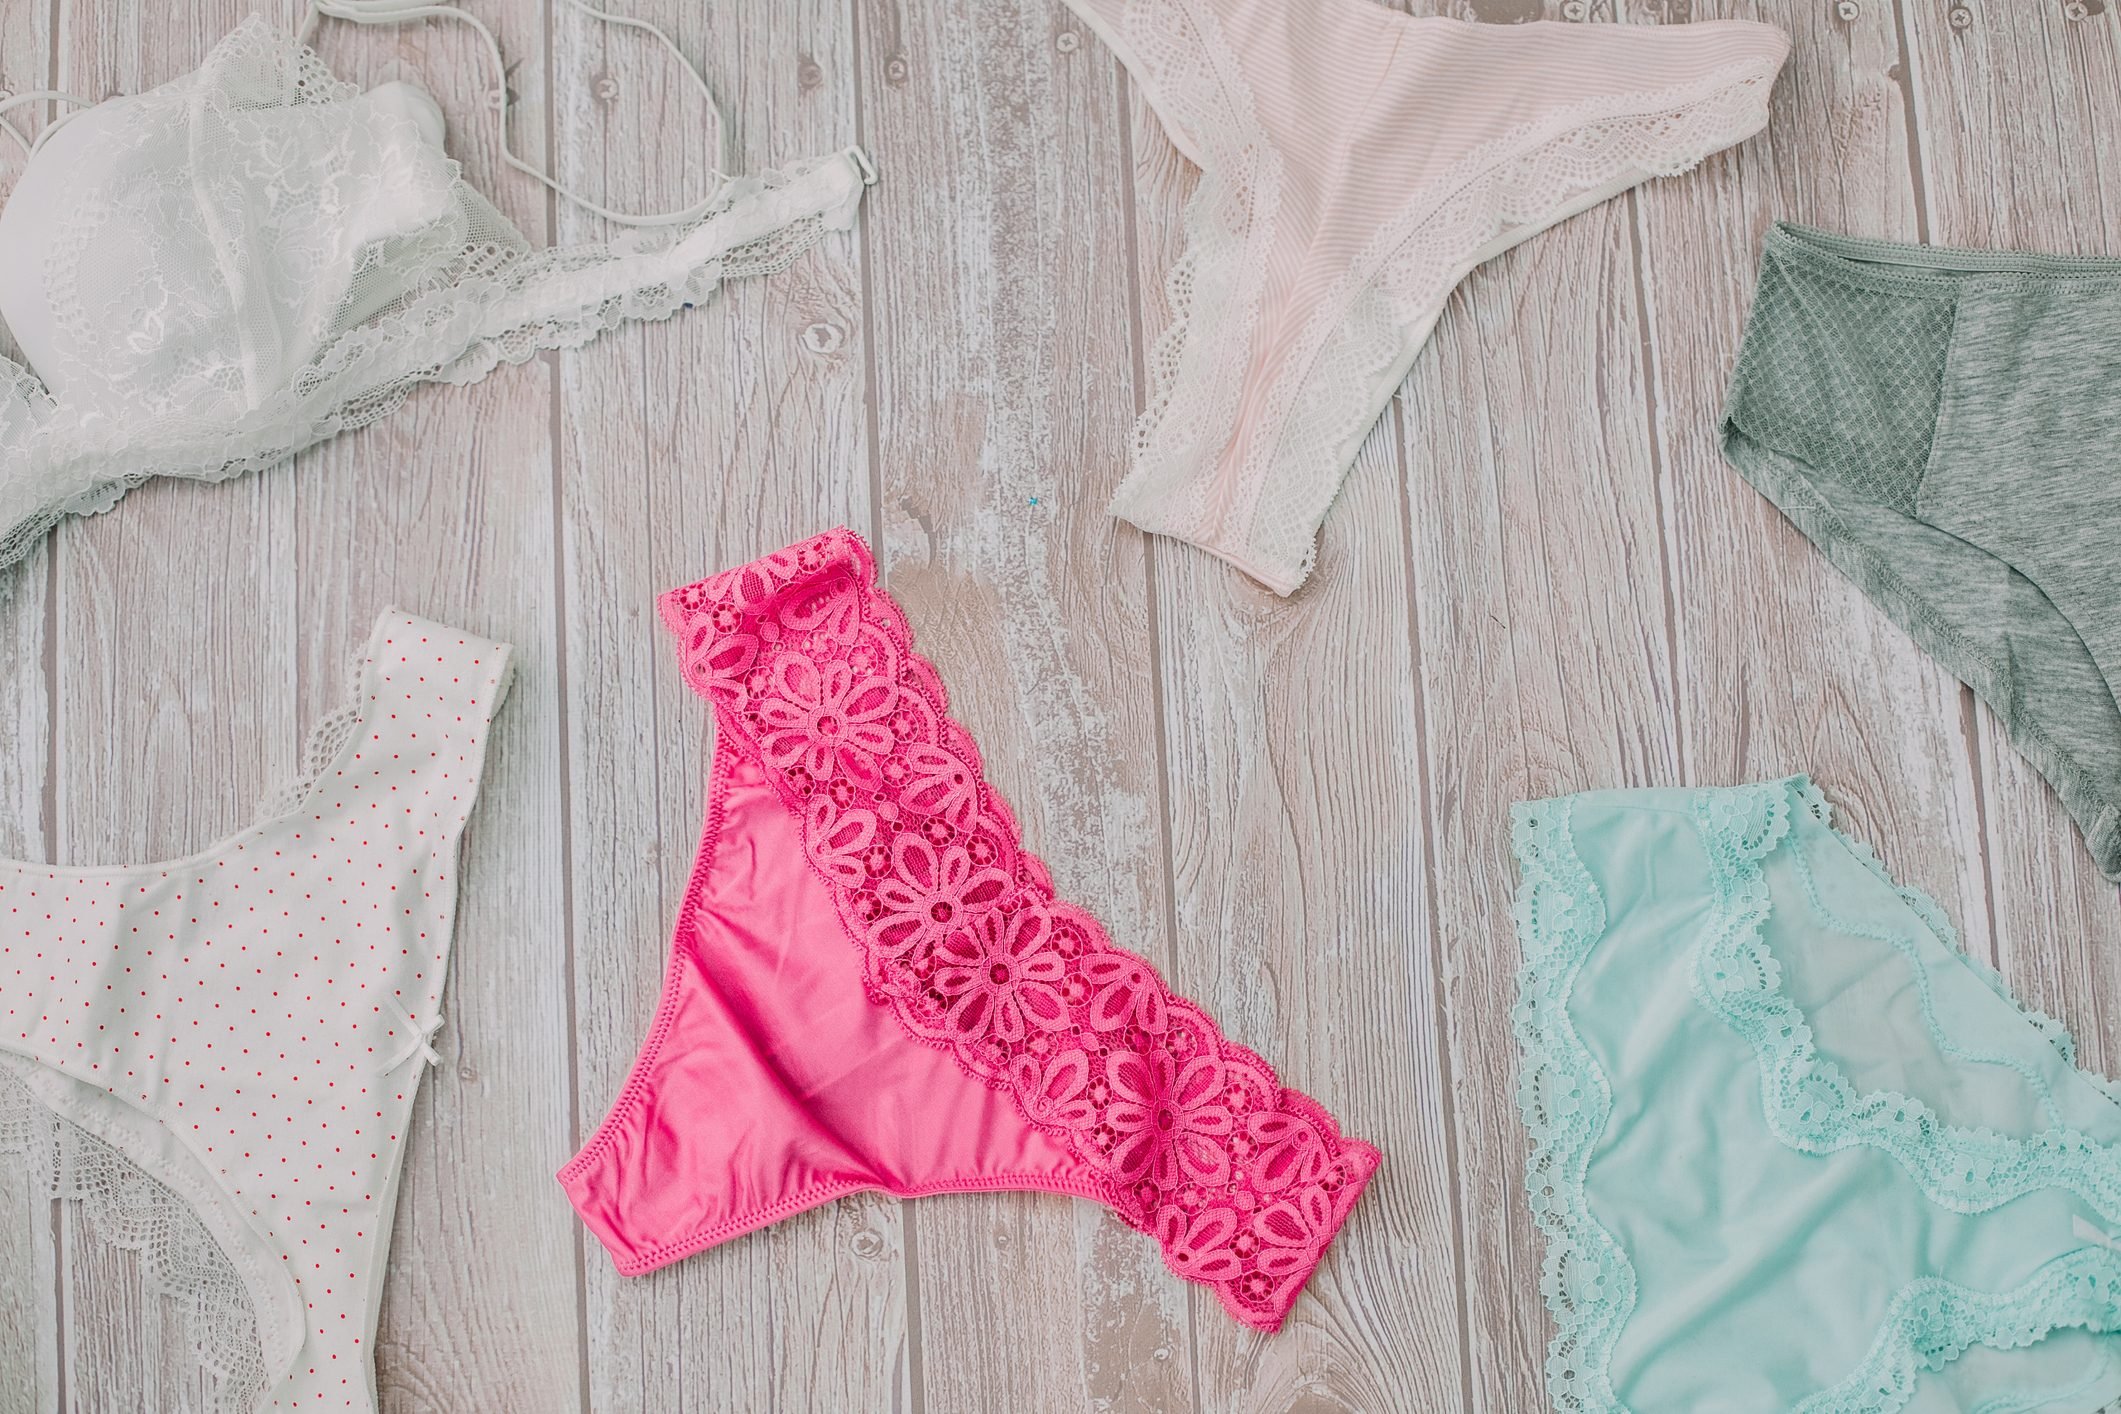 Is Lace Underwear Bad For You  Lace Underwear Bad For You - SHEfinds